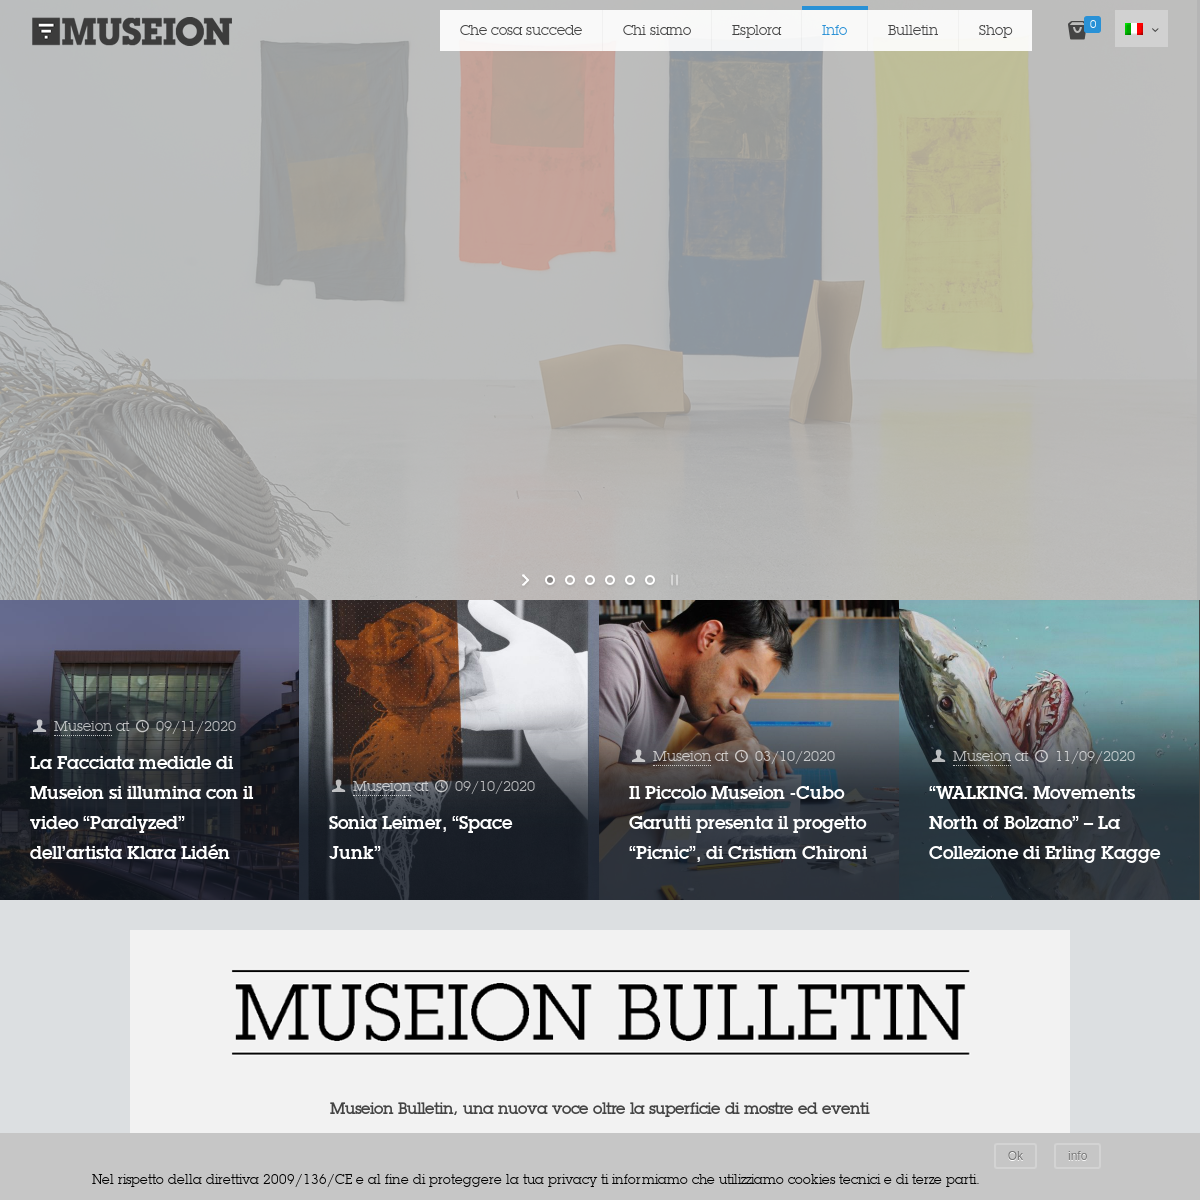 A complete backup of museion.it